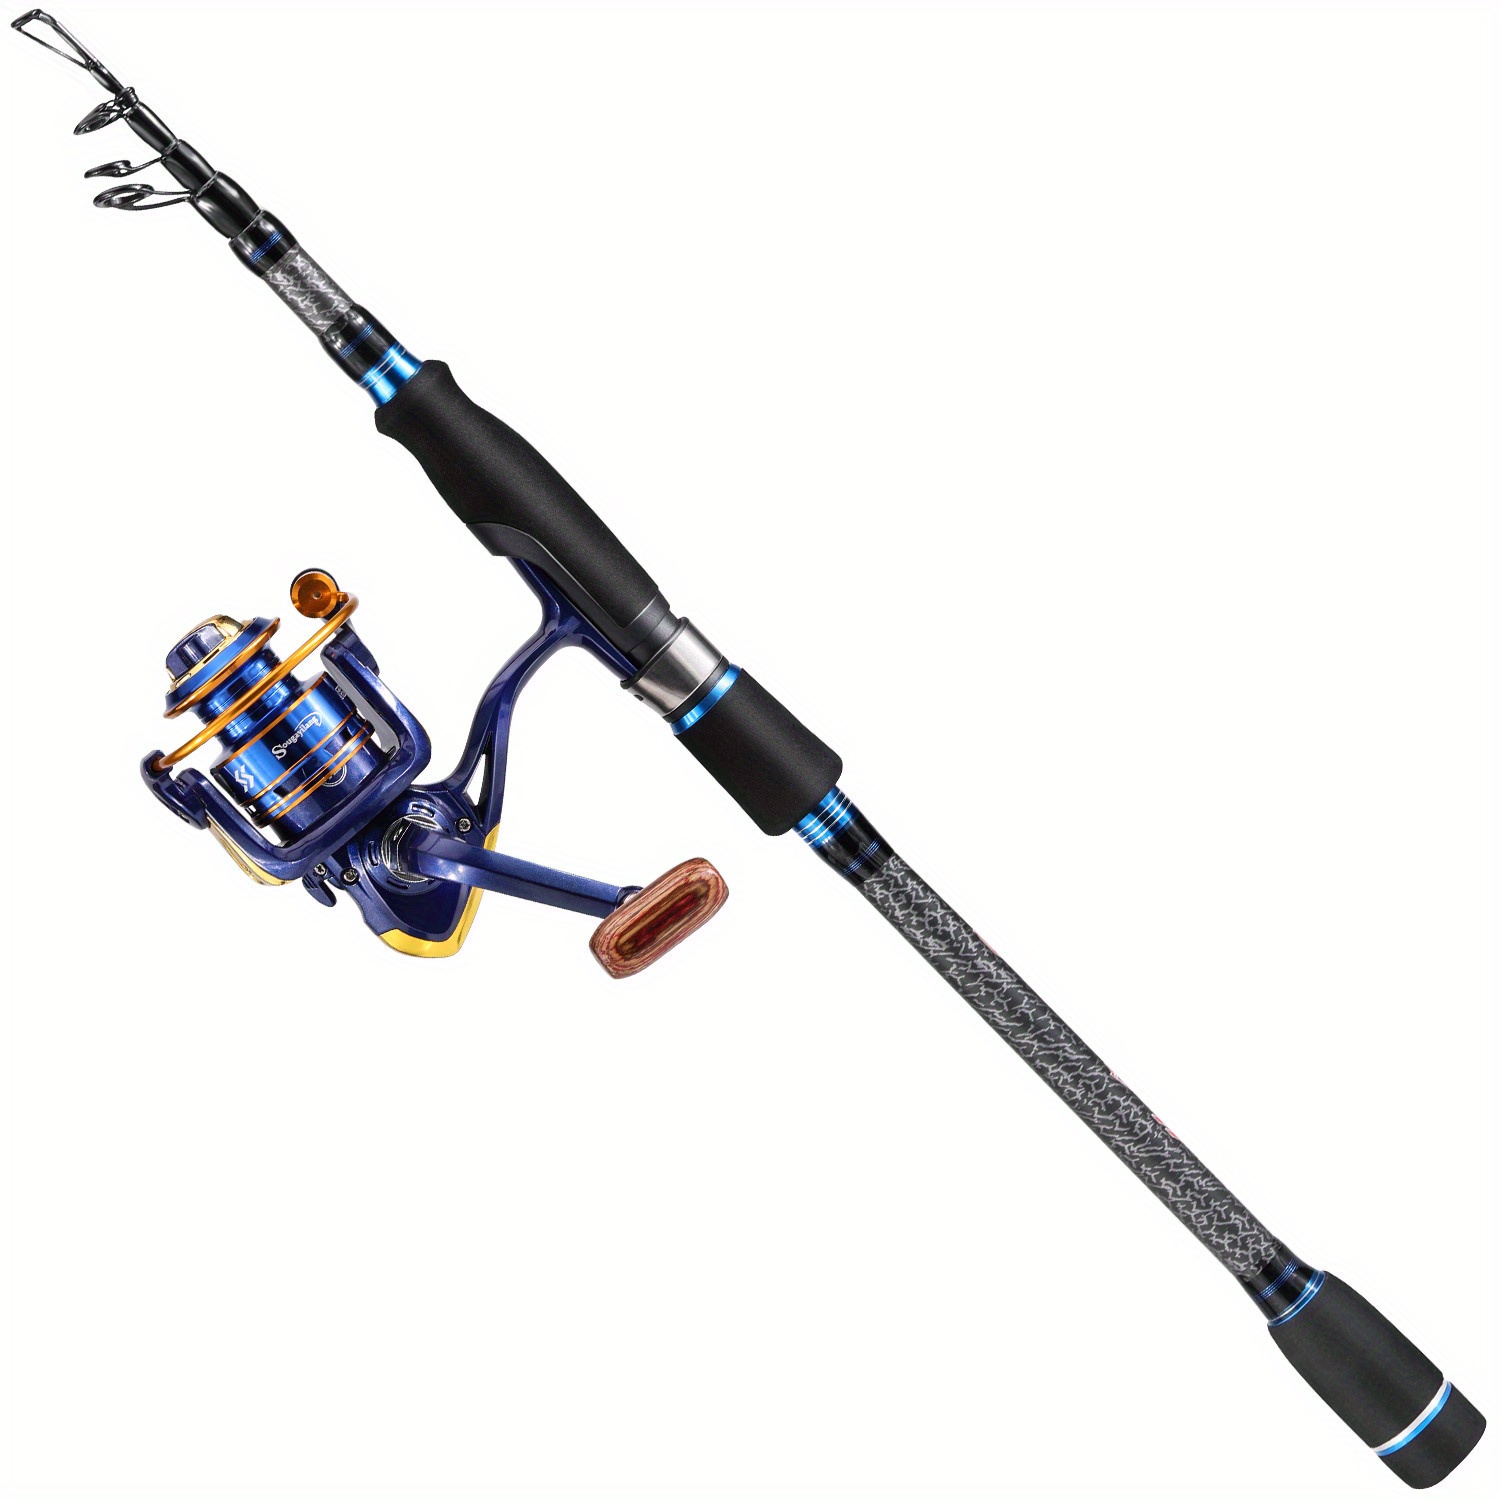 Sougayilang Best Boat Spinning Rod Set Carbon Fiber Reel And Rod Set, Max  Drag 8kg For Bass, Pike, And Trout Tackle 18m/21m Lengths Available 230904  From Xuan09, $29.55